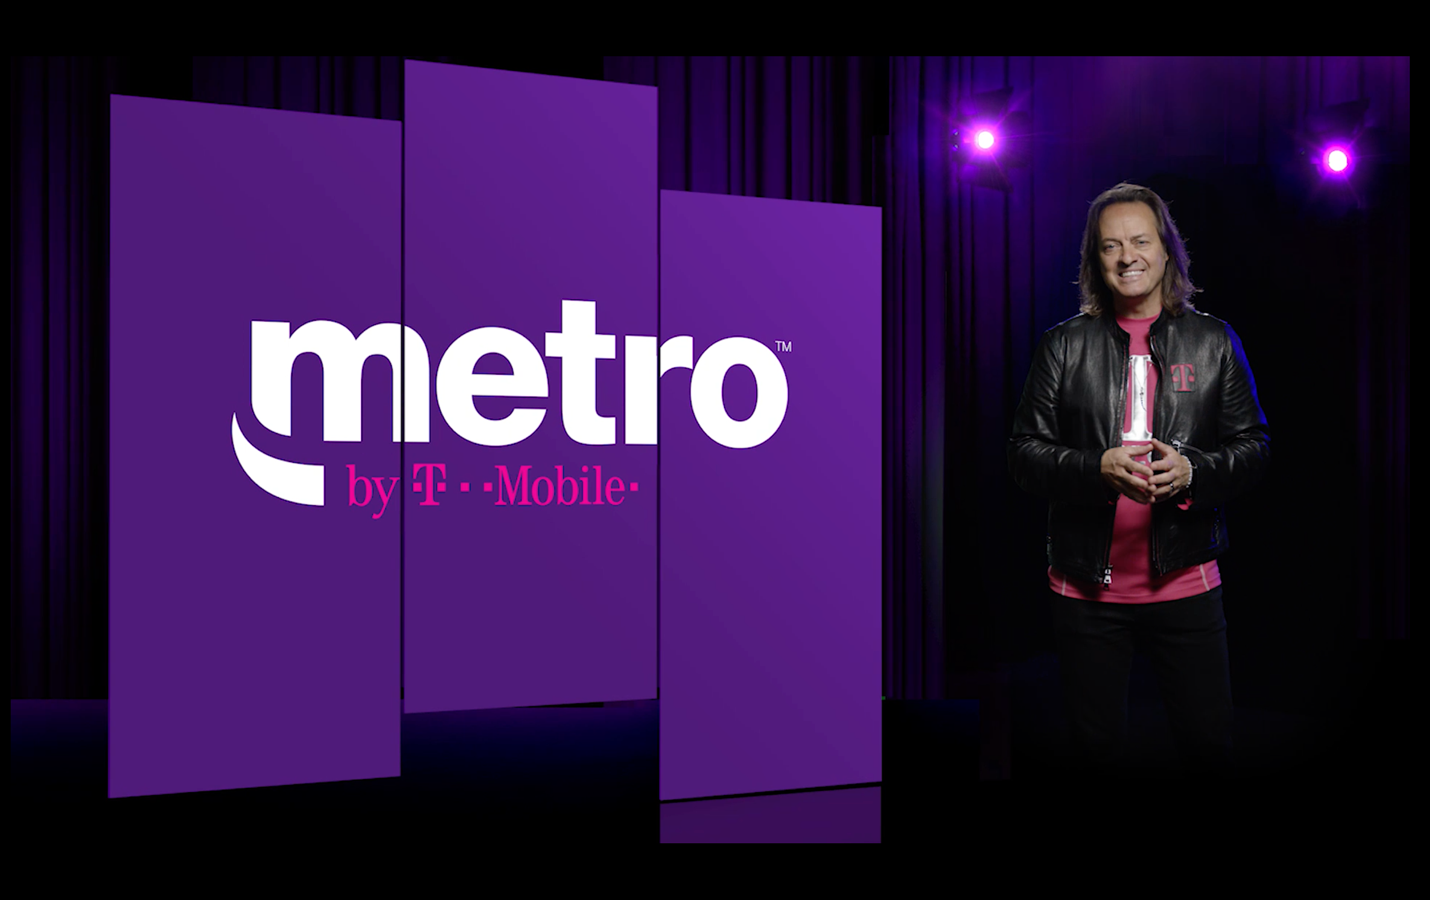 T-Mobile's pre-paid Metro service will get 5G support in 2019